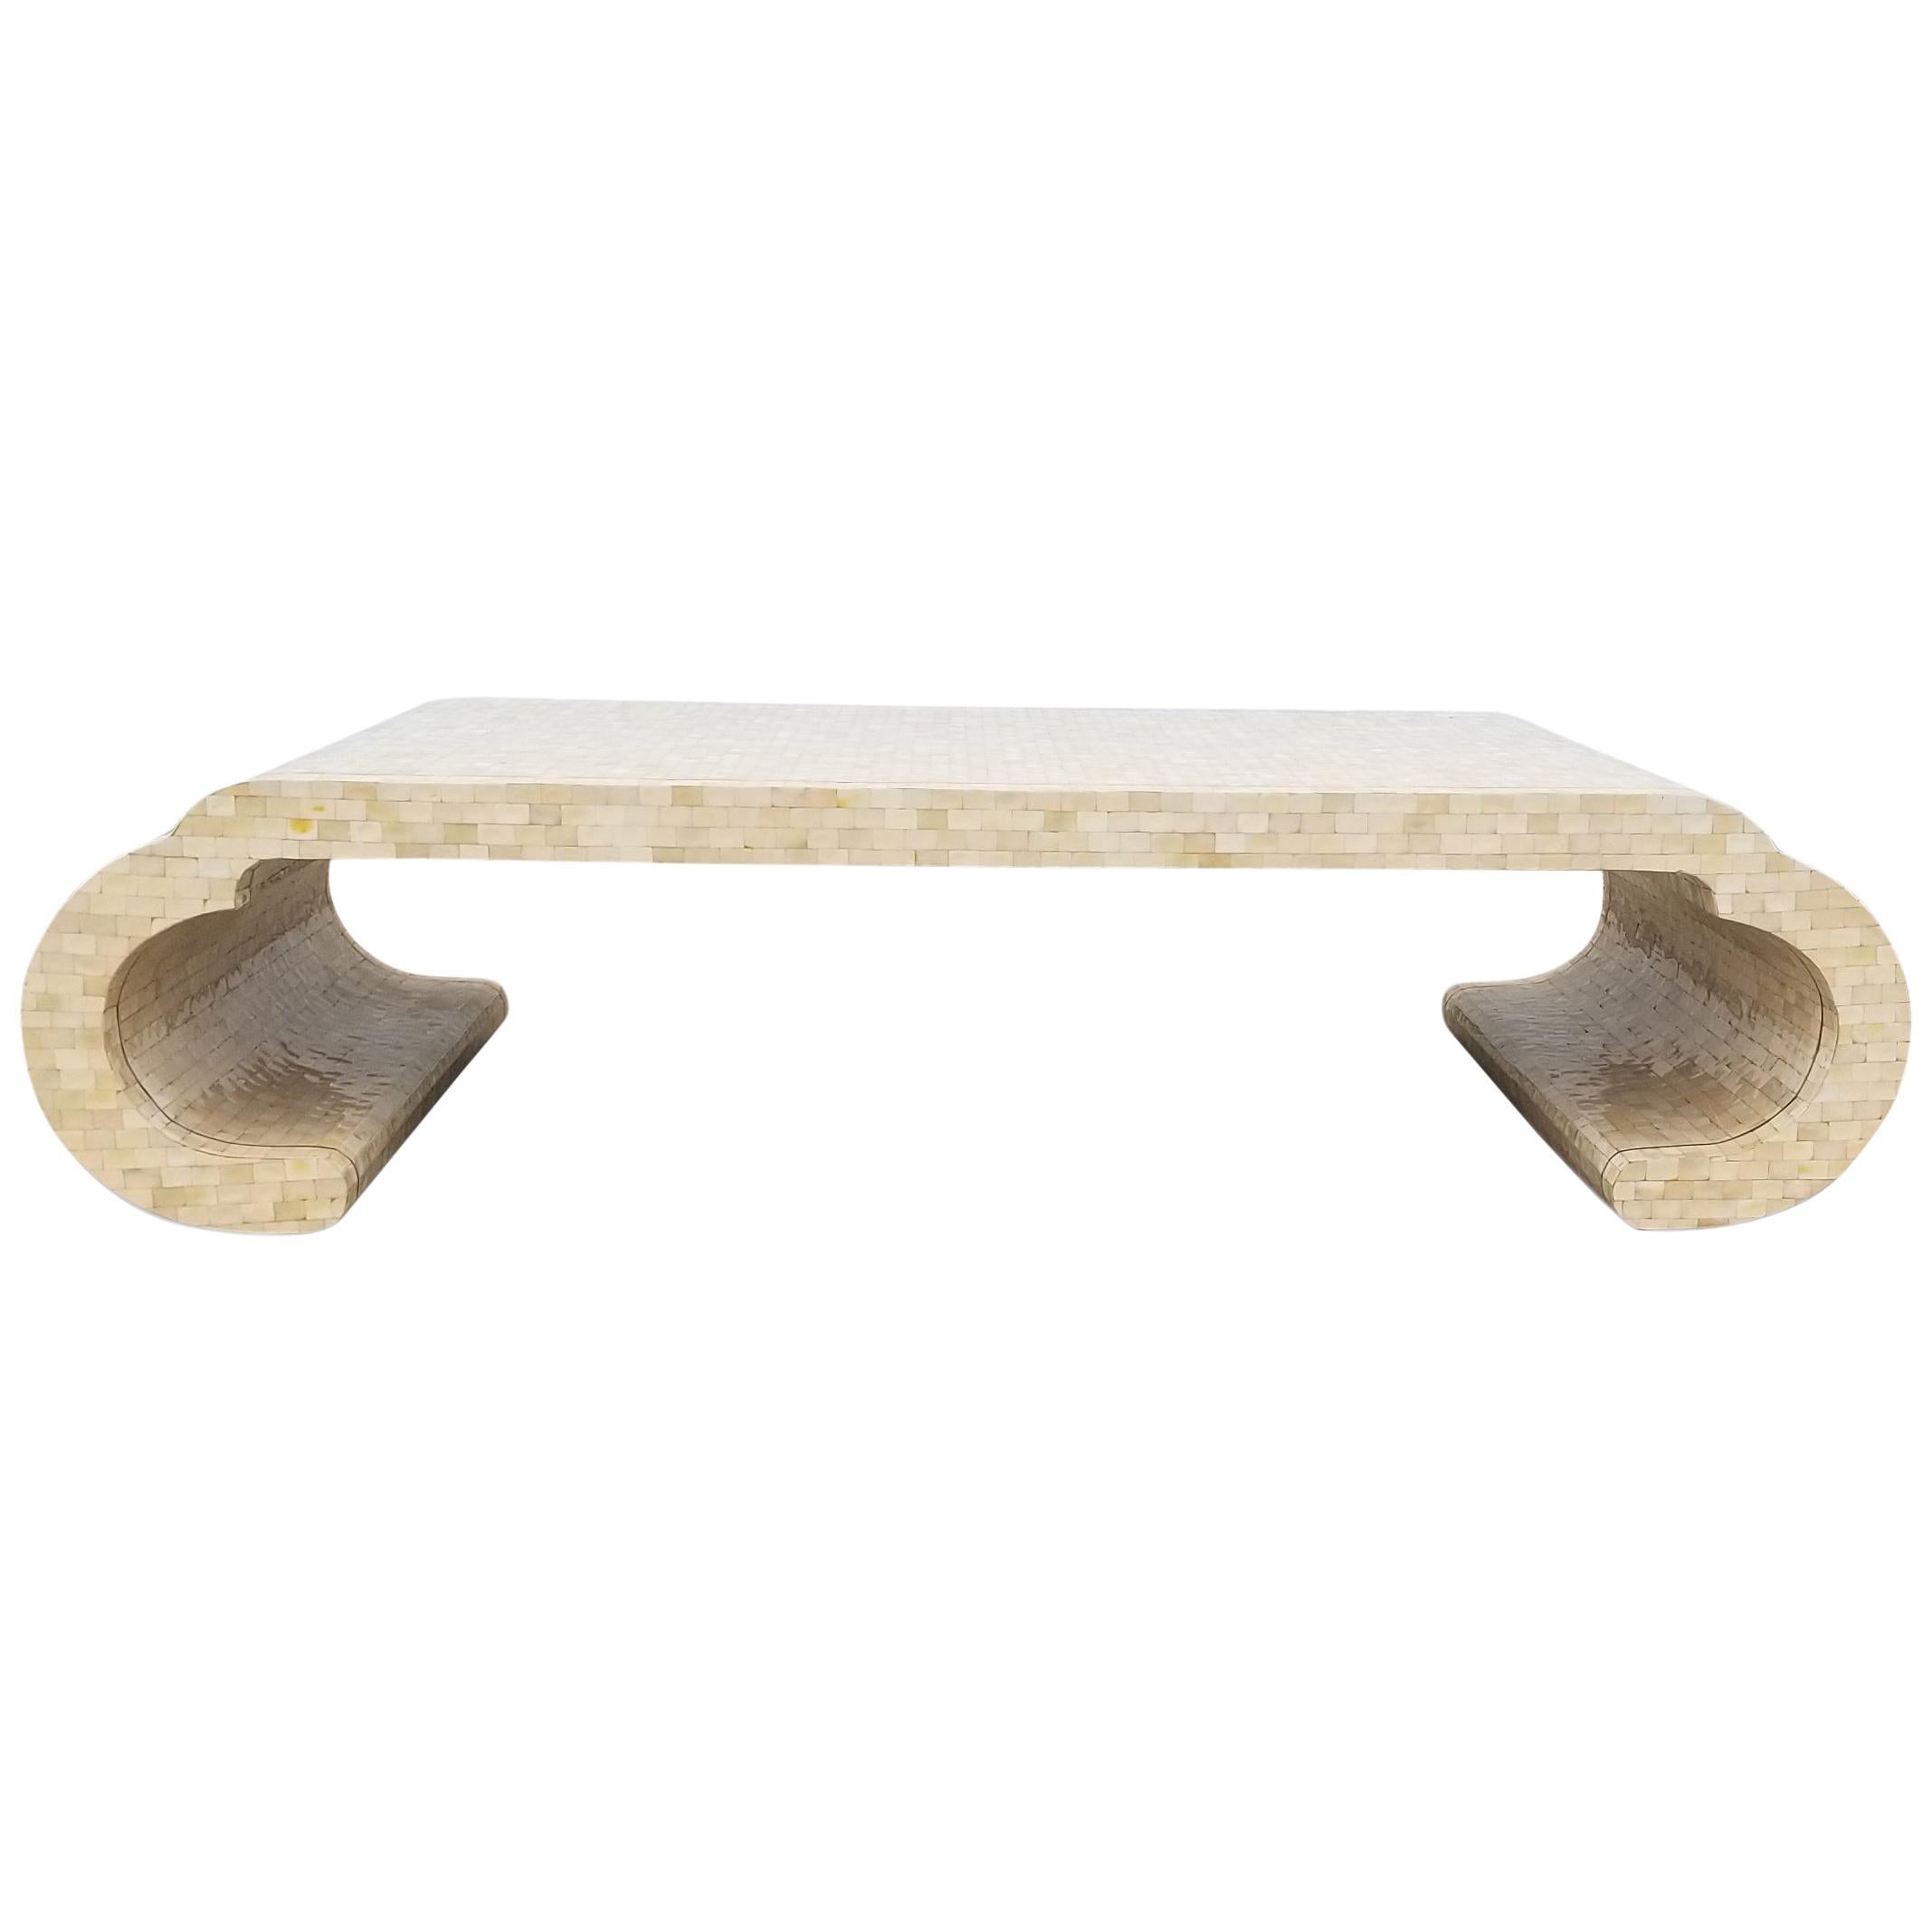 Maitland Smith Tesselated Bone Coffee Table with Brass Edge Detail